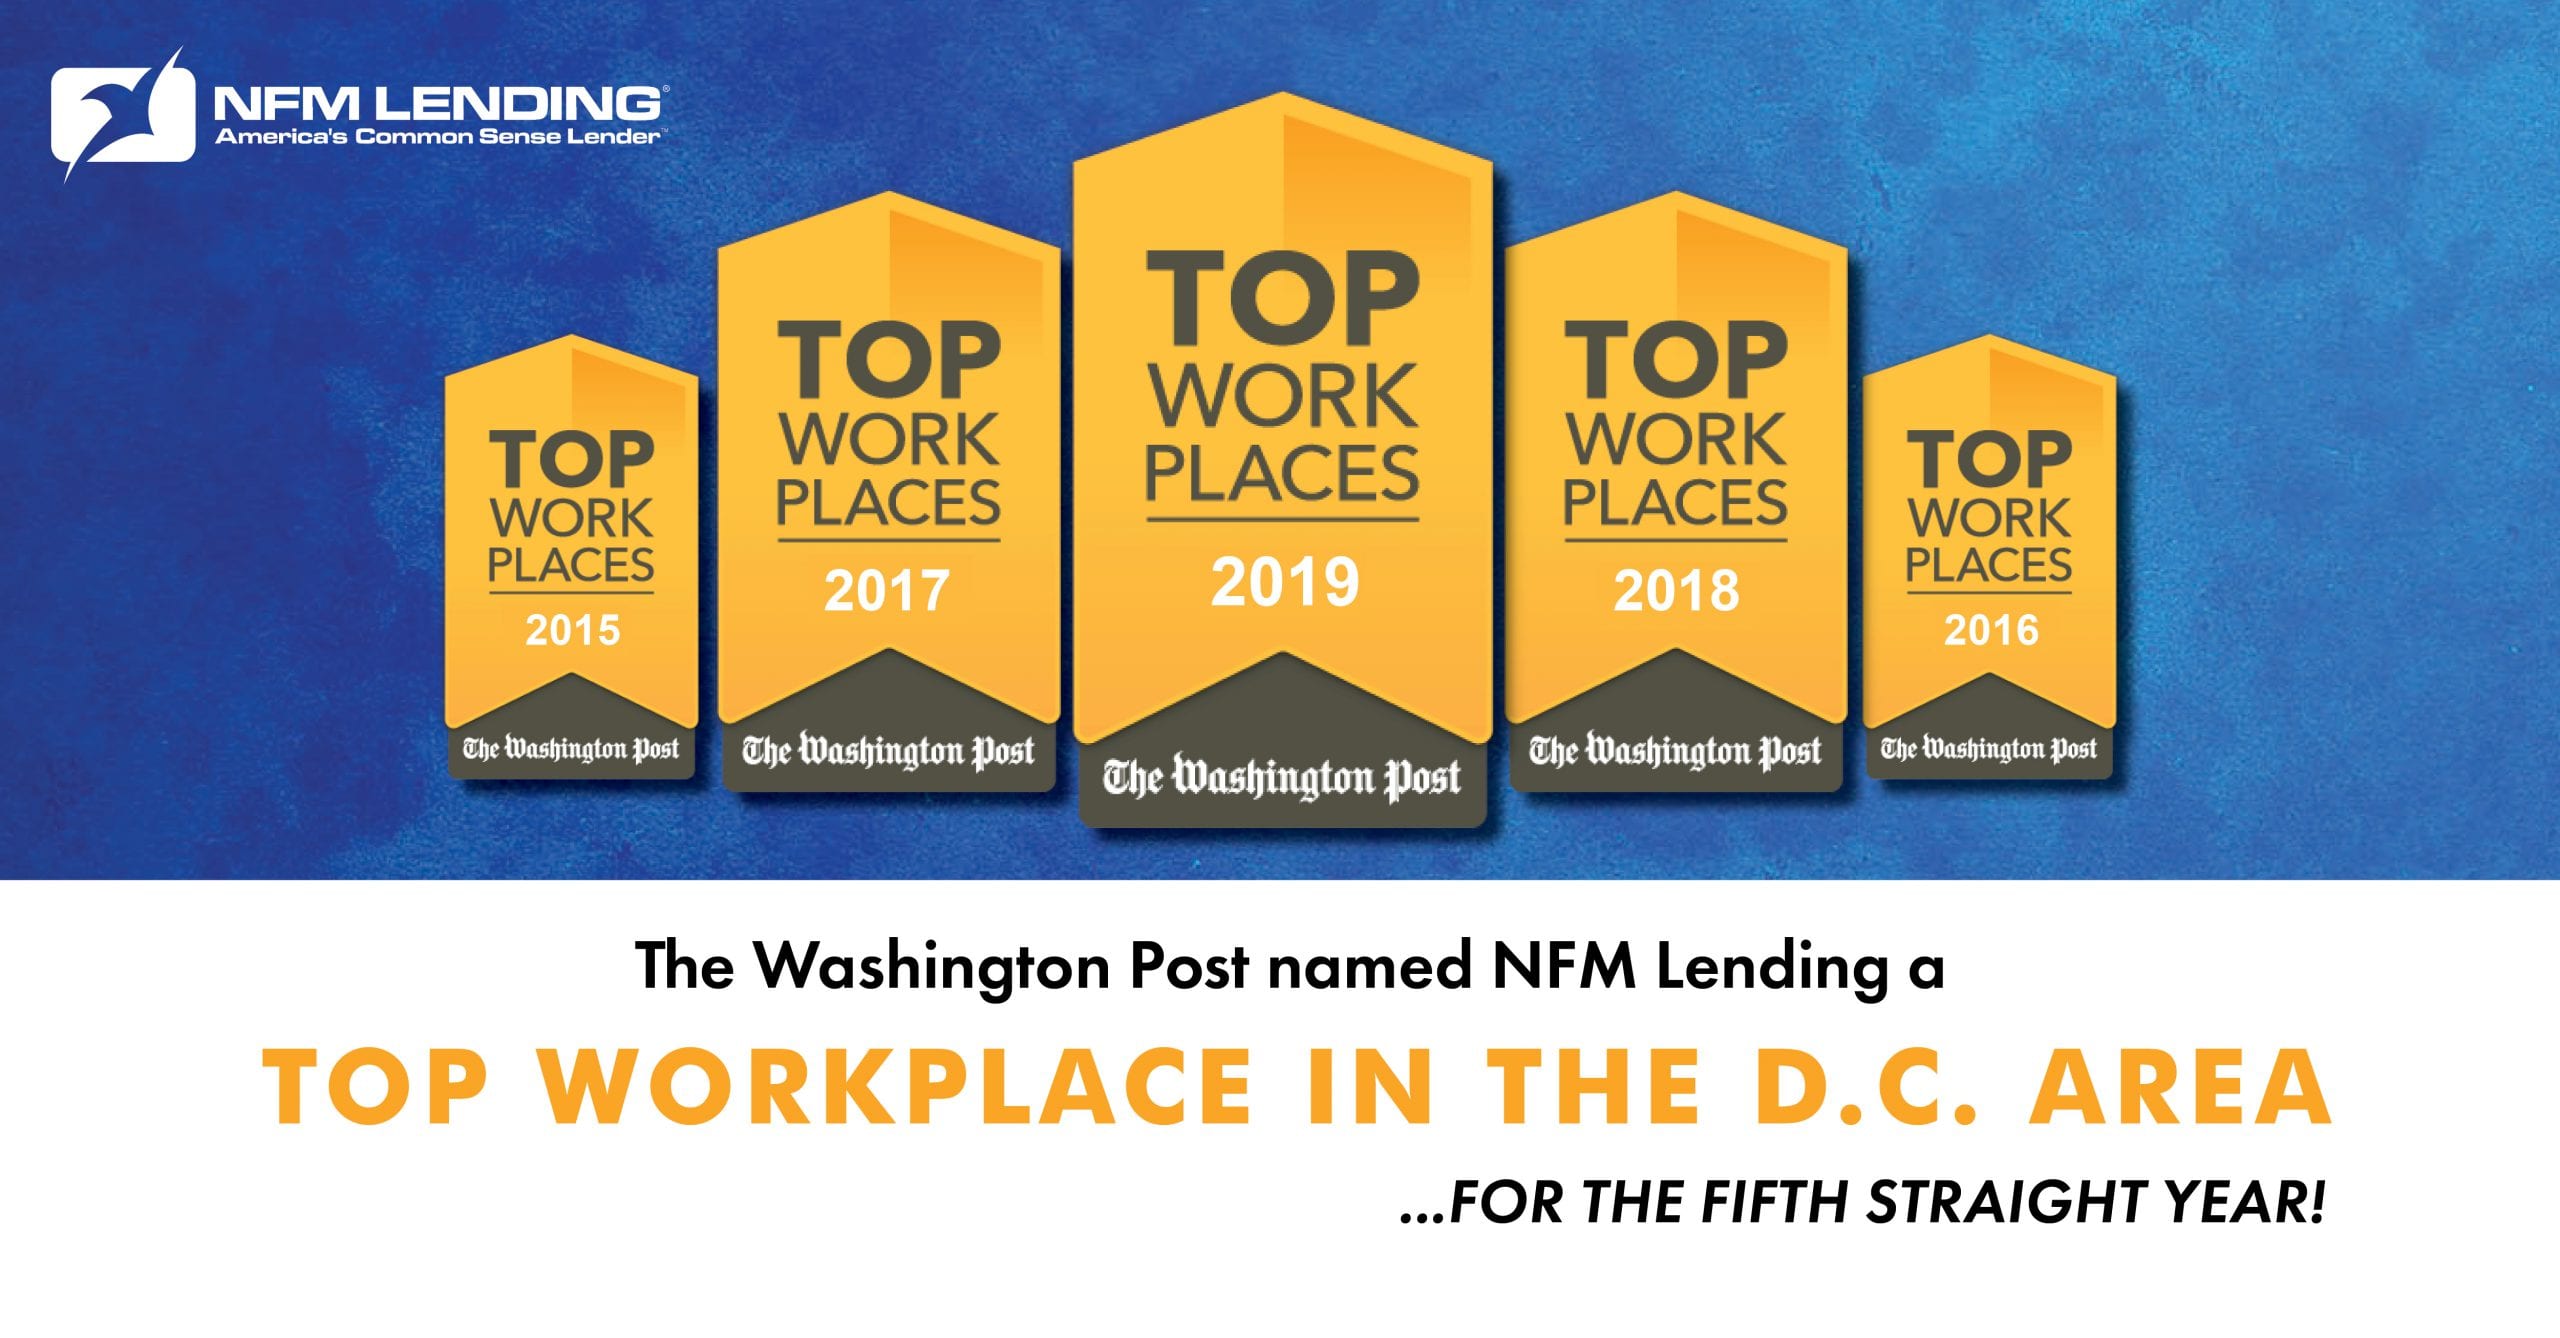 Top Workplaces